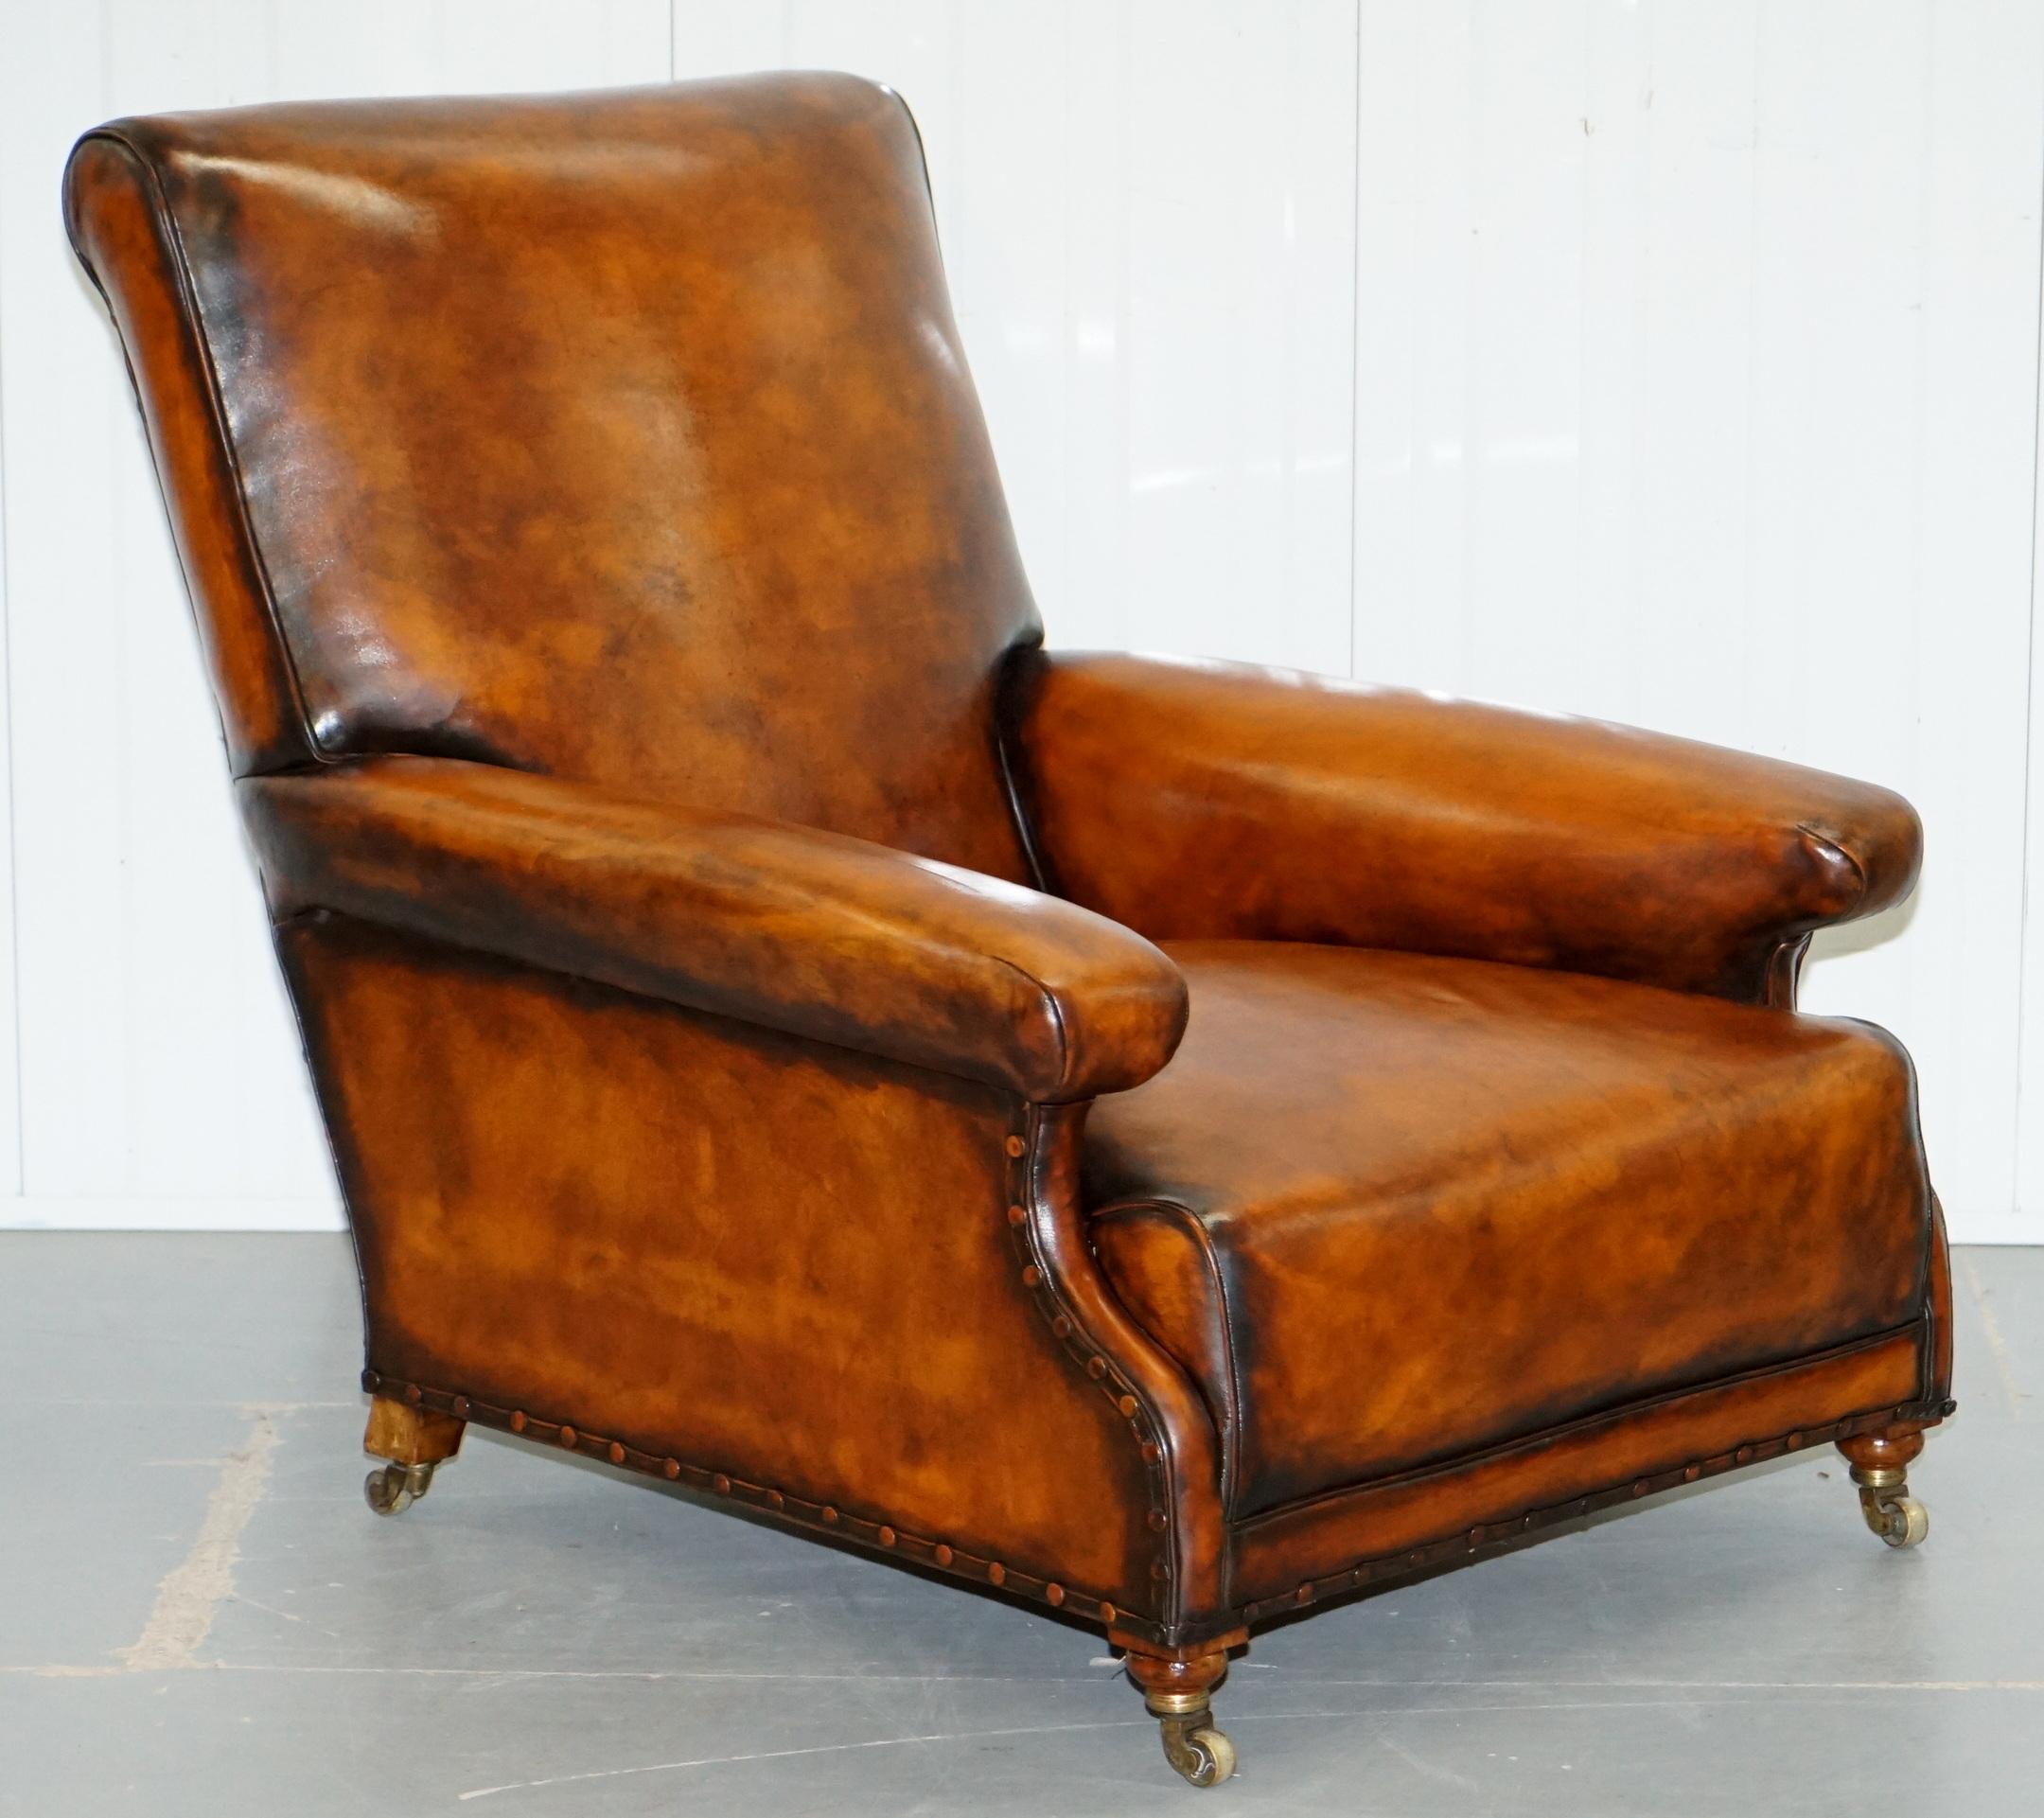 We are delighted to offer for sale this stunning exceptionally rare original early Victorian walnut framed Howard & Son’s Berners street tobacco brown leather armchair

I have various other Howard and Son's armchairs and sofas listed under my